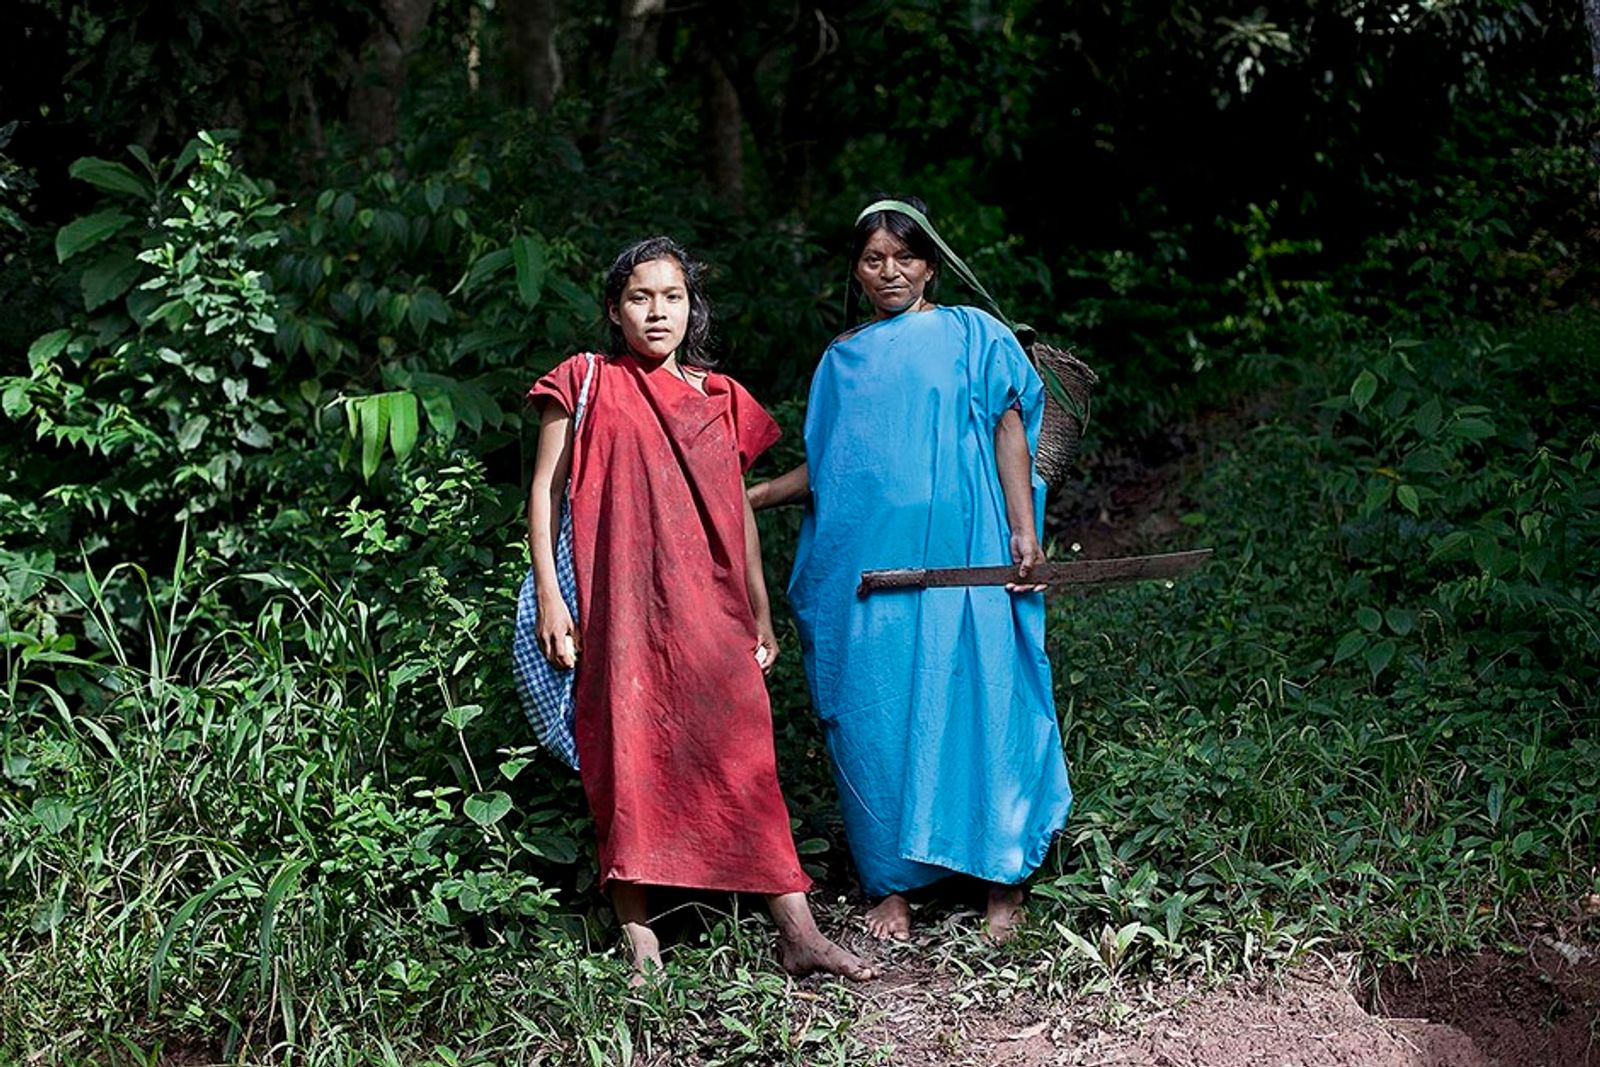 © Marta Moreiras - Eva and her aunt Airontsi are about to get lost in the jungle in search of wood for cooking.